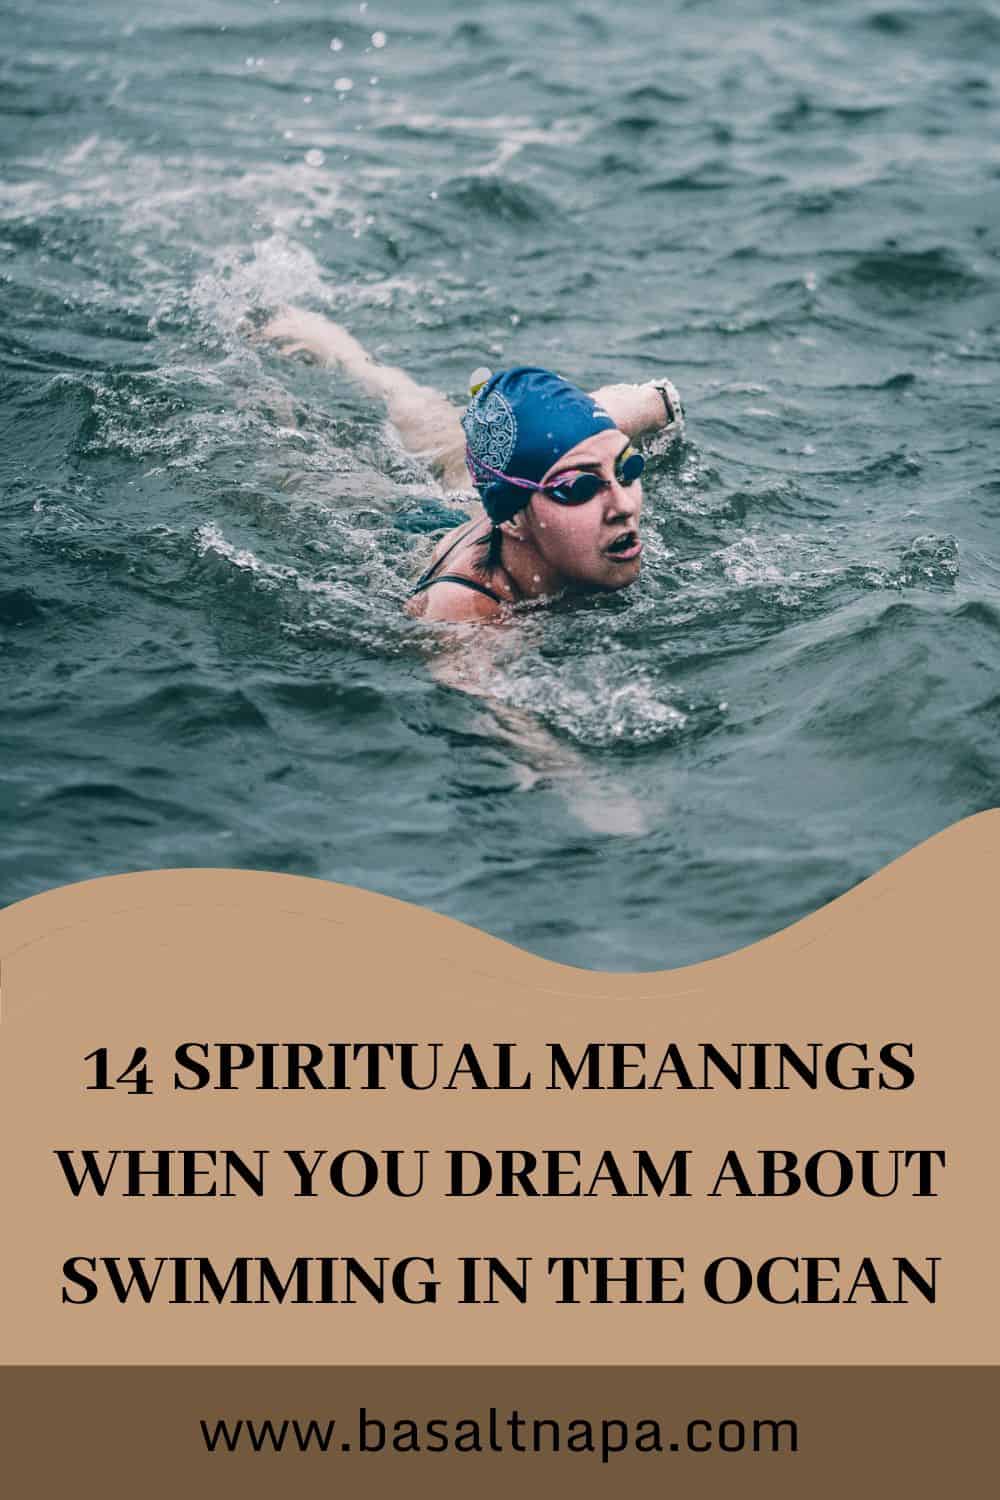 14 Spiritual Meanings When You Dream About Swimming In The Ocean